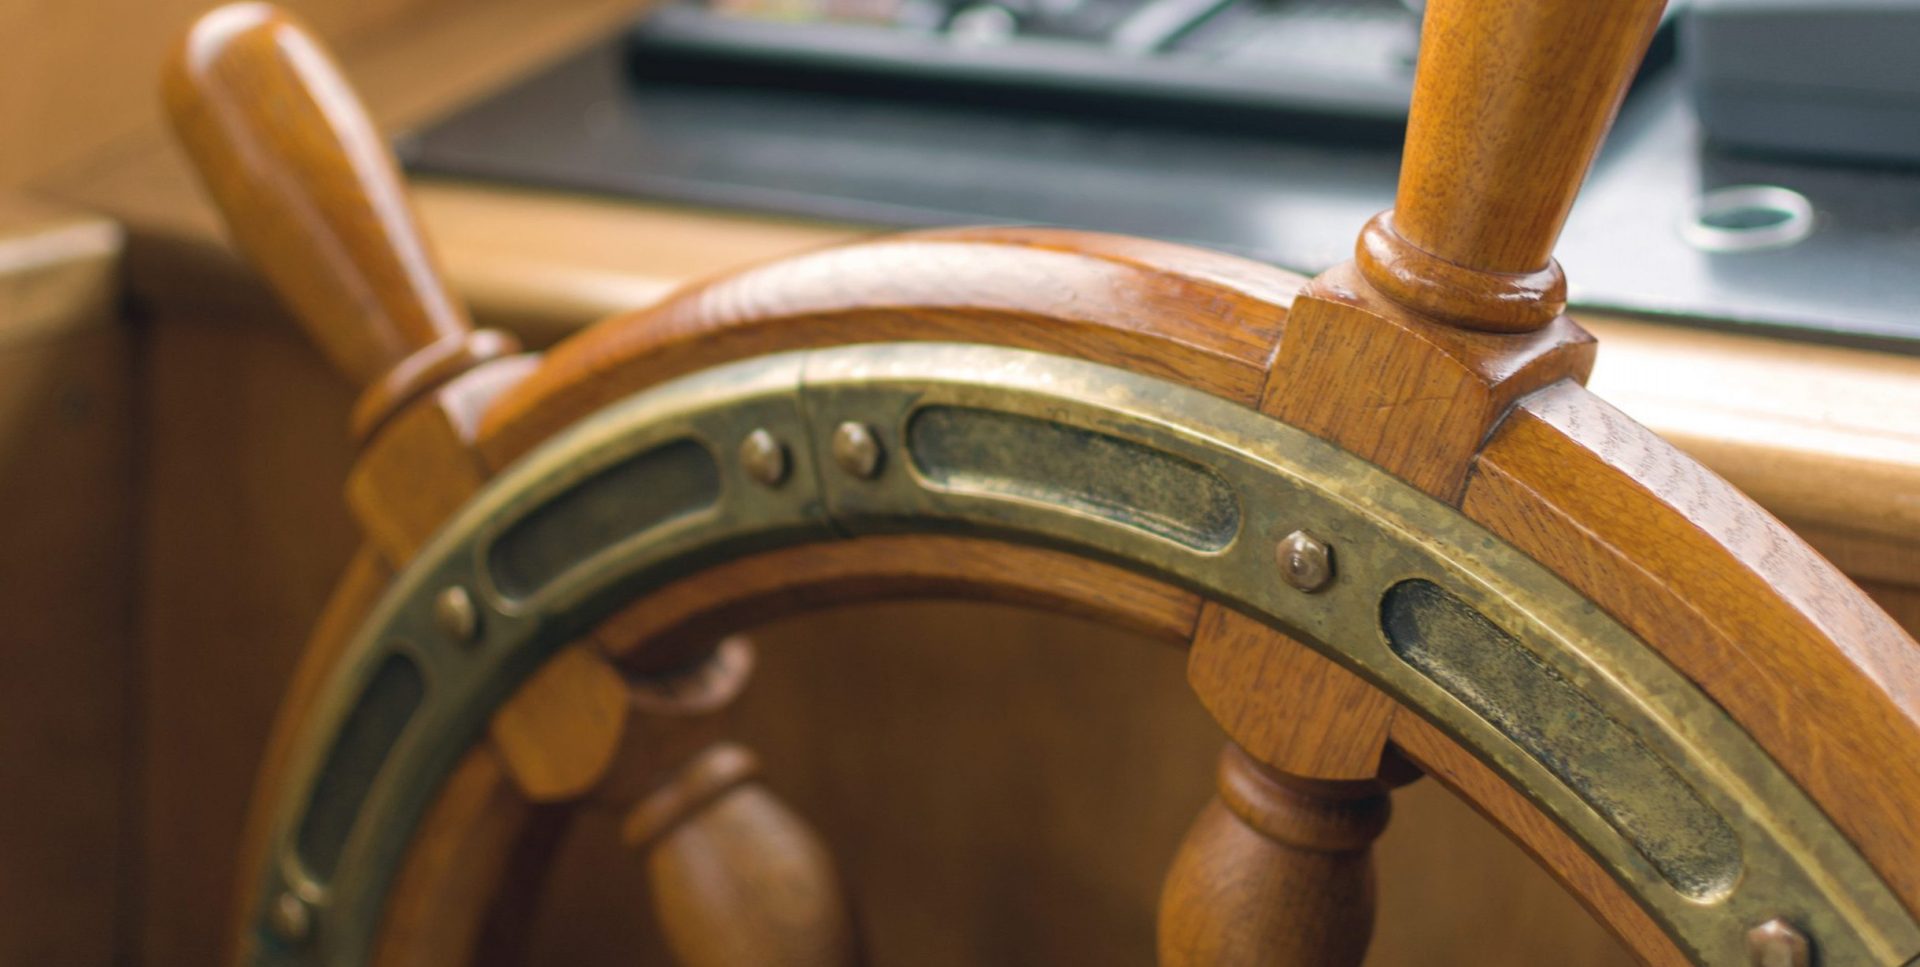 Wooden rudder. Captains steering wheel of an old wooden sailing ship.